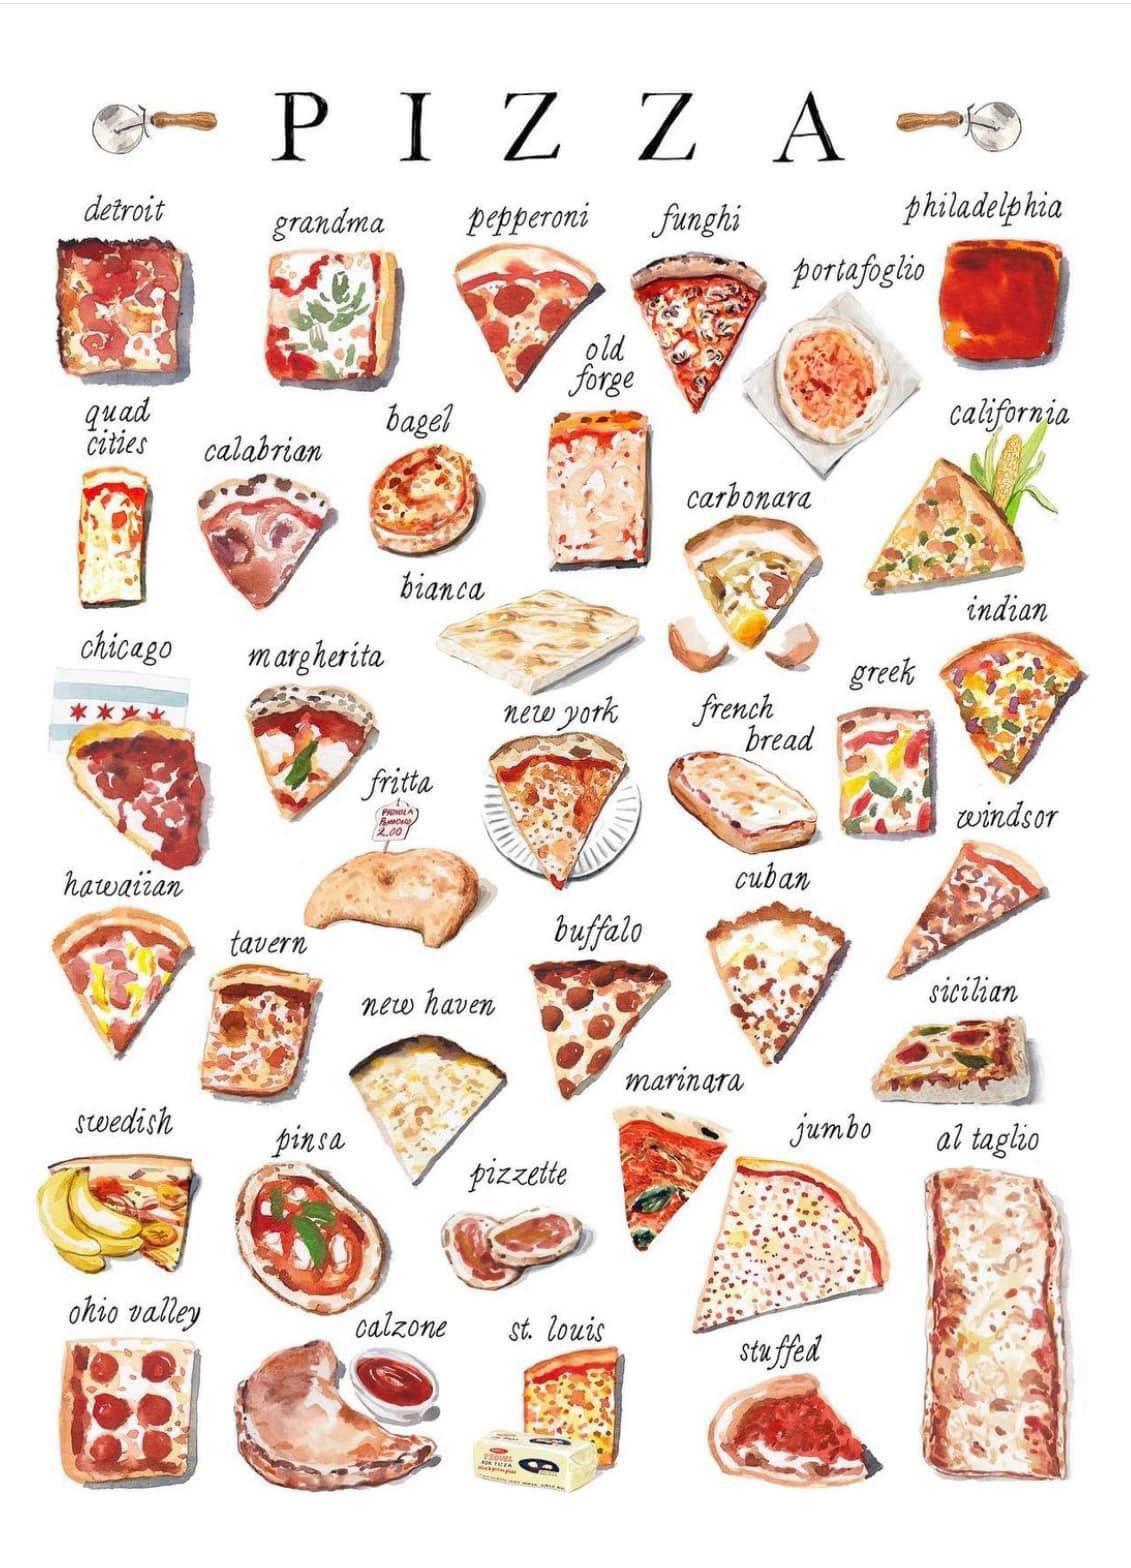 Pizza types guide